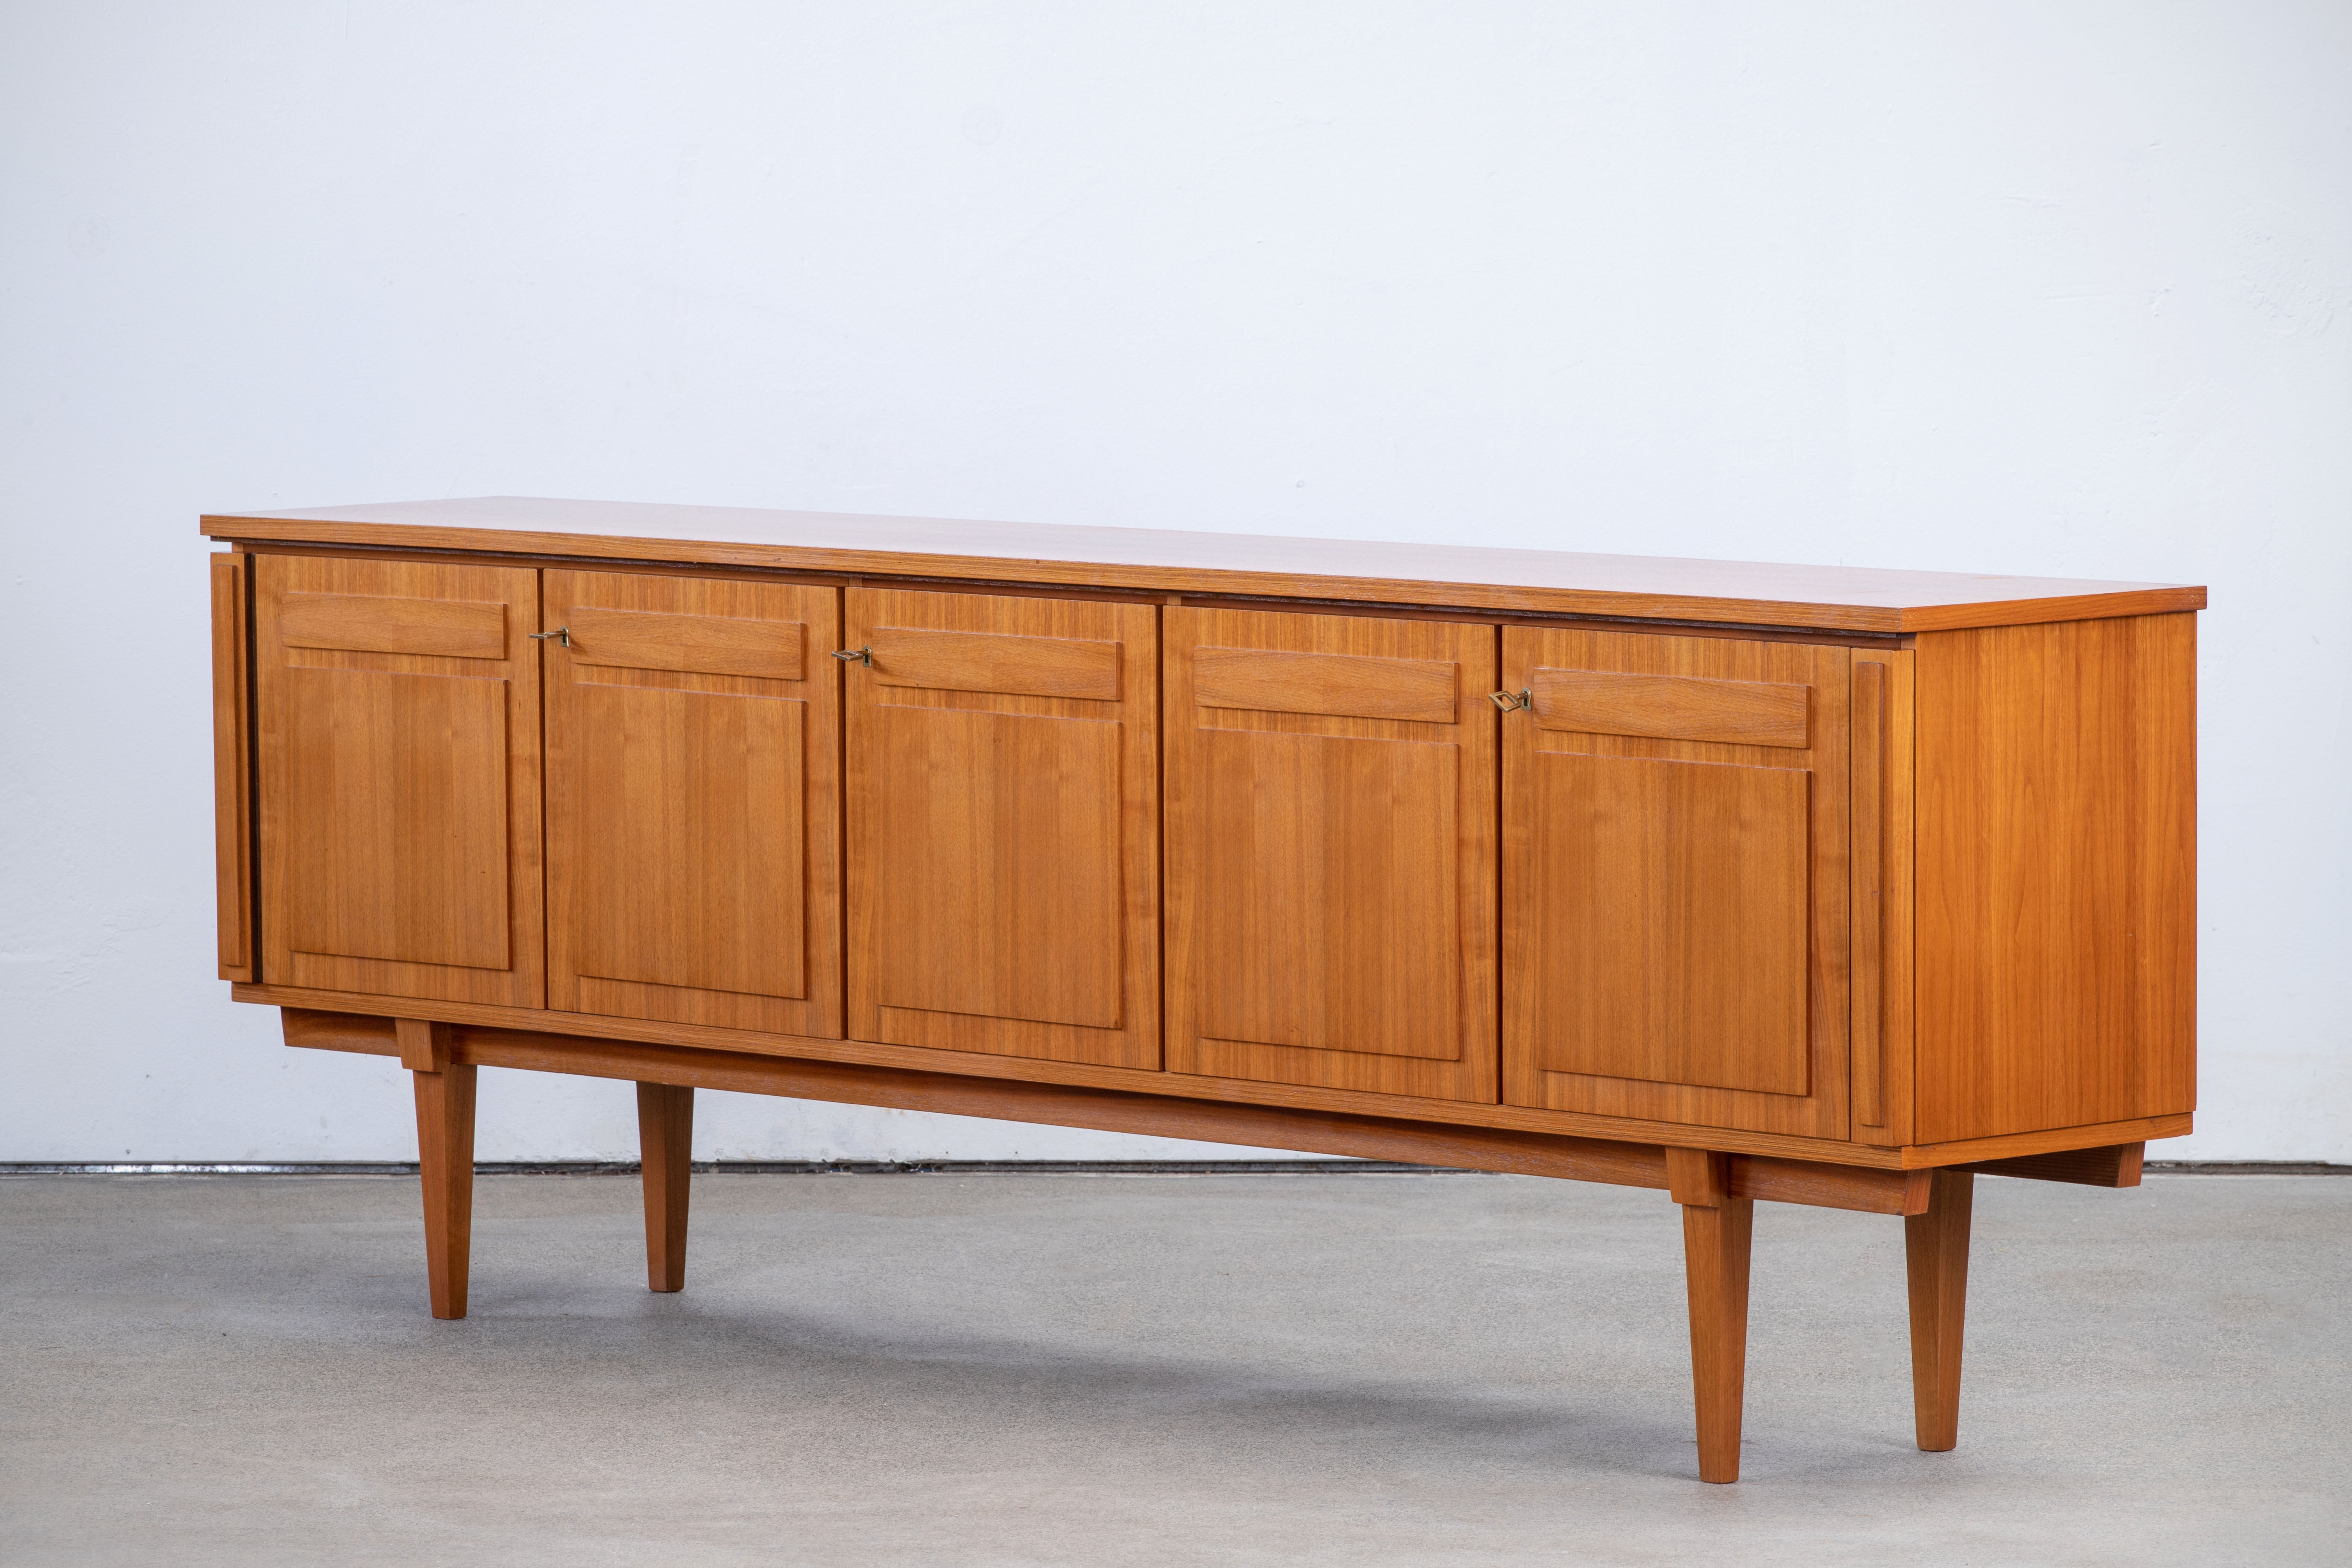 MidCentury sideboard in teak, Germany, 1960s.
An elegant piece.
Good condition with minor wear.